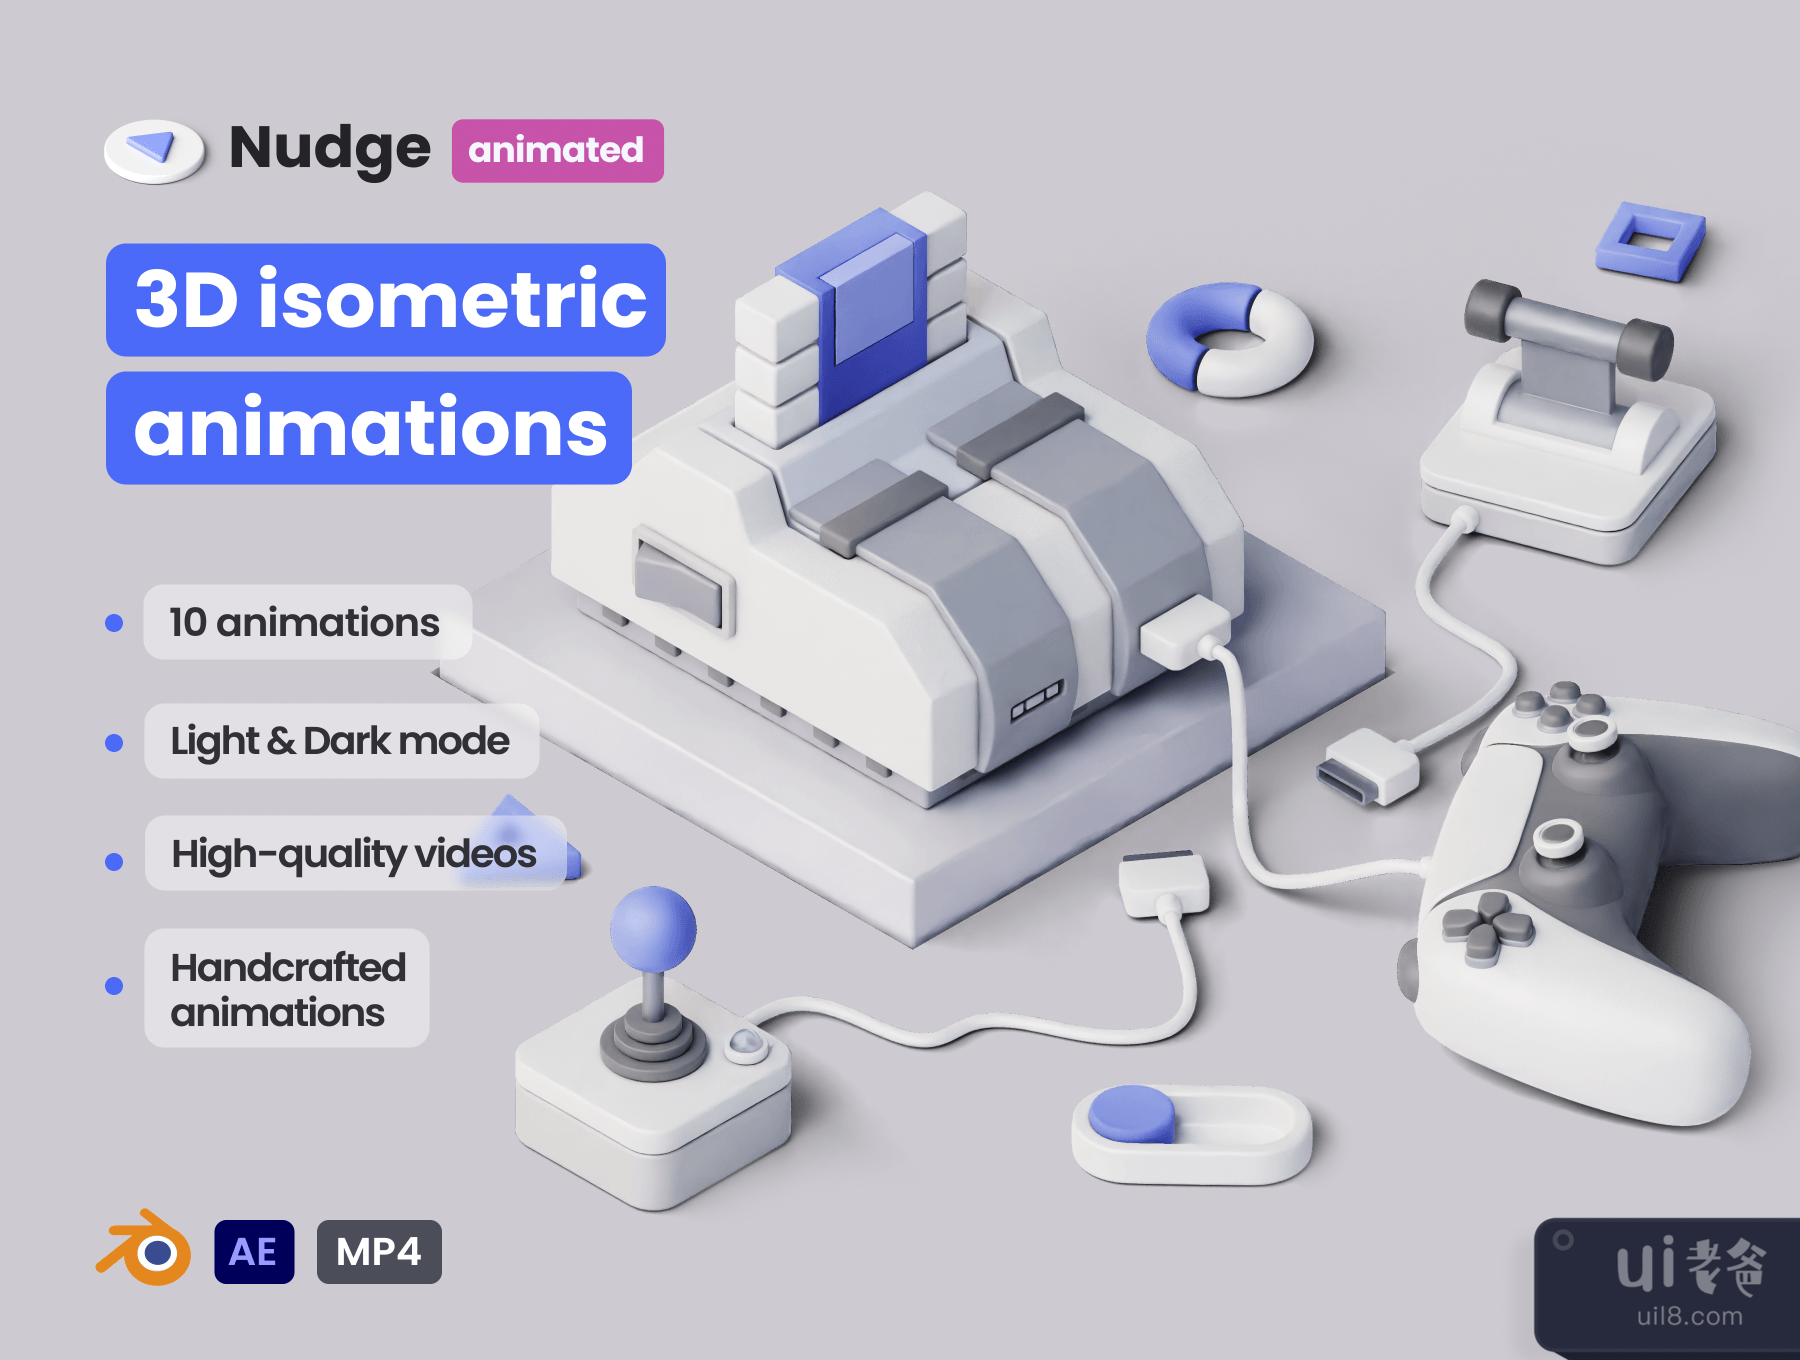 Nudge 3D动画 (Nudge 3D animated)插图